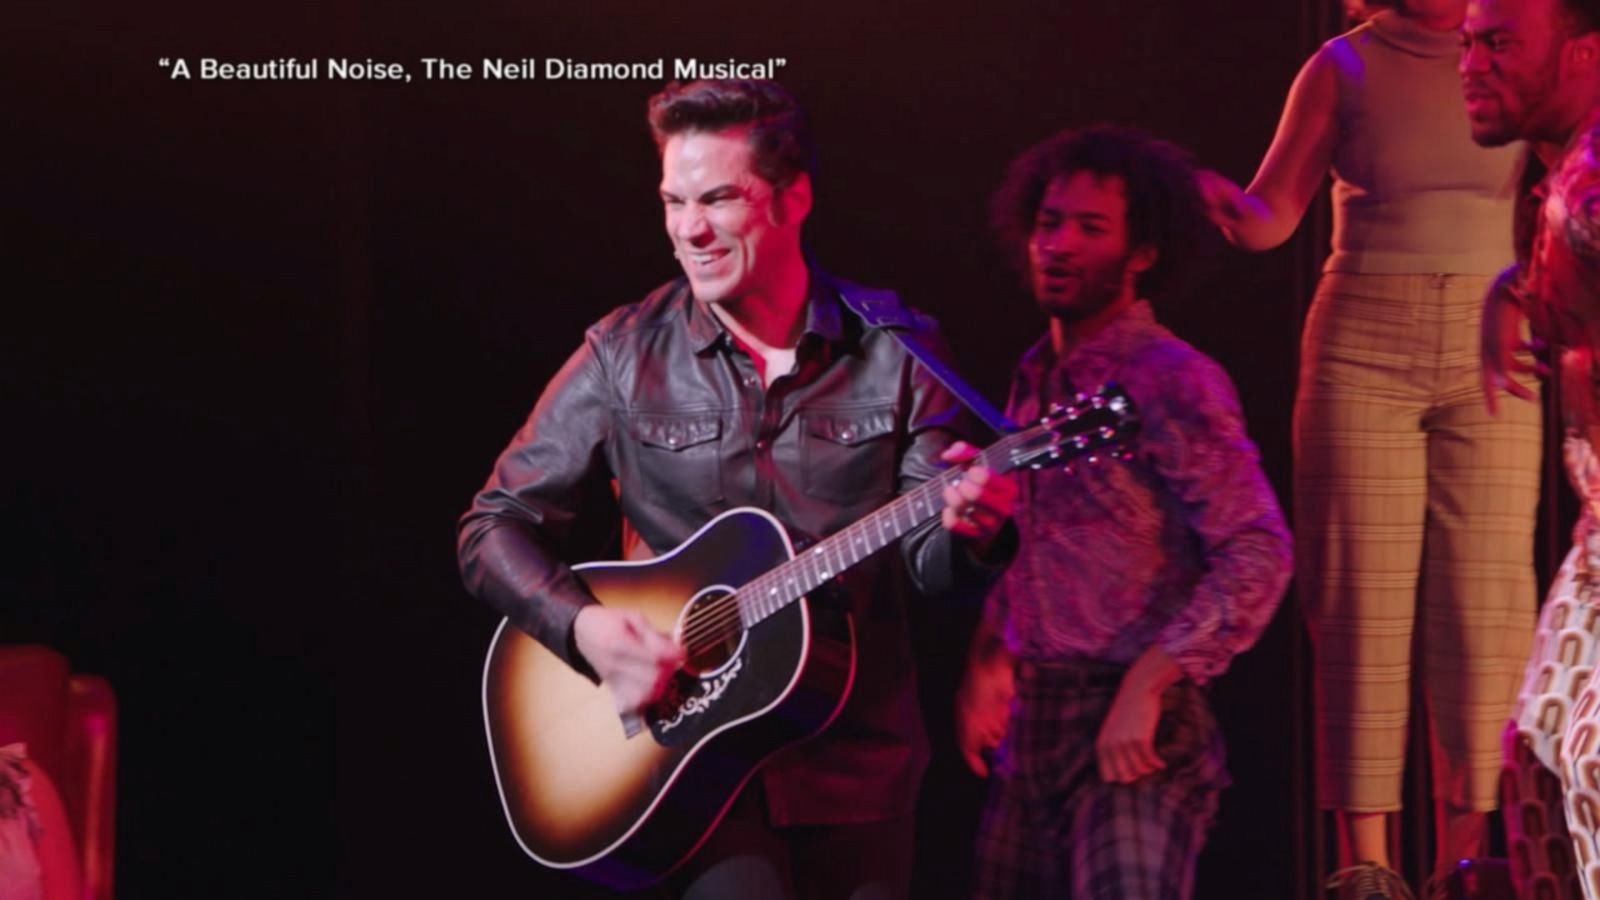 Inside look at ‘A Beautiful Noise - The Neil Diamond Musical’